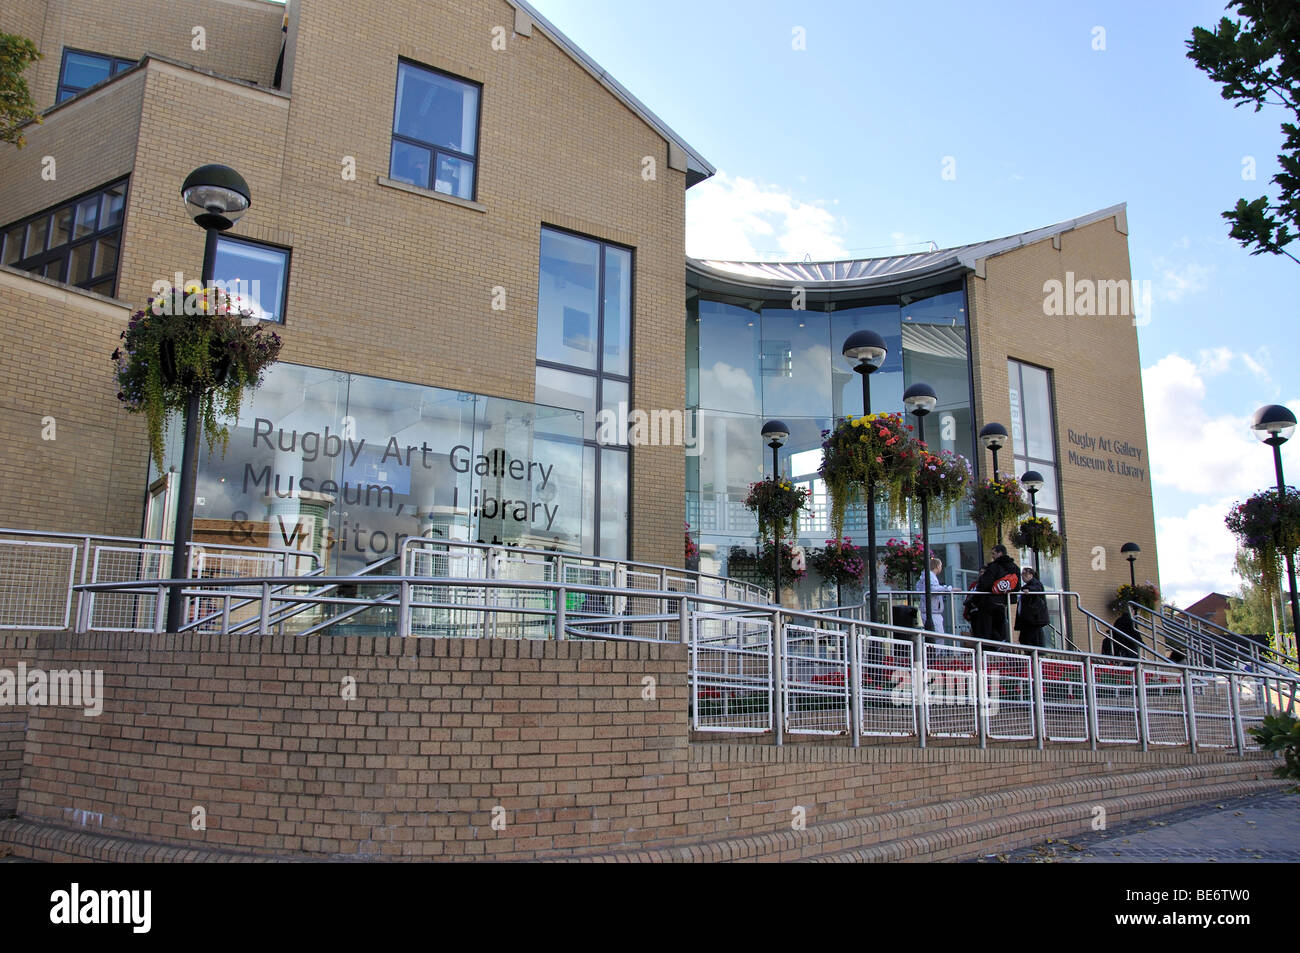 Rugby Art Gallery, Museo. Library & Visitor Centre, Little Elborow Street, Rugby, Warwickshire, Inghilterra, Regno Unito Foto Stock